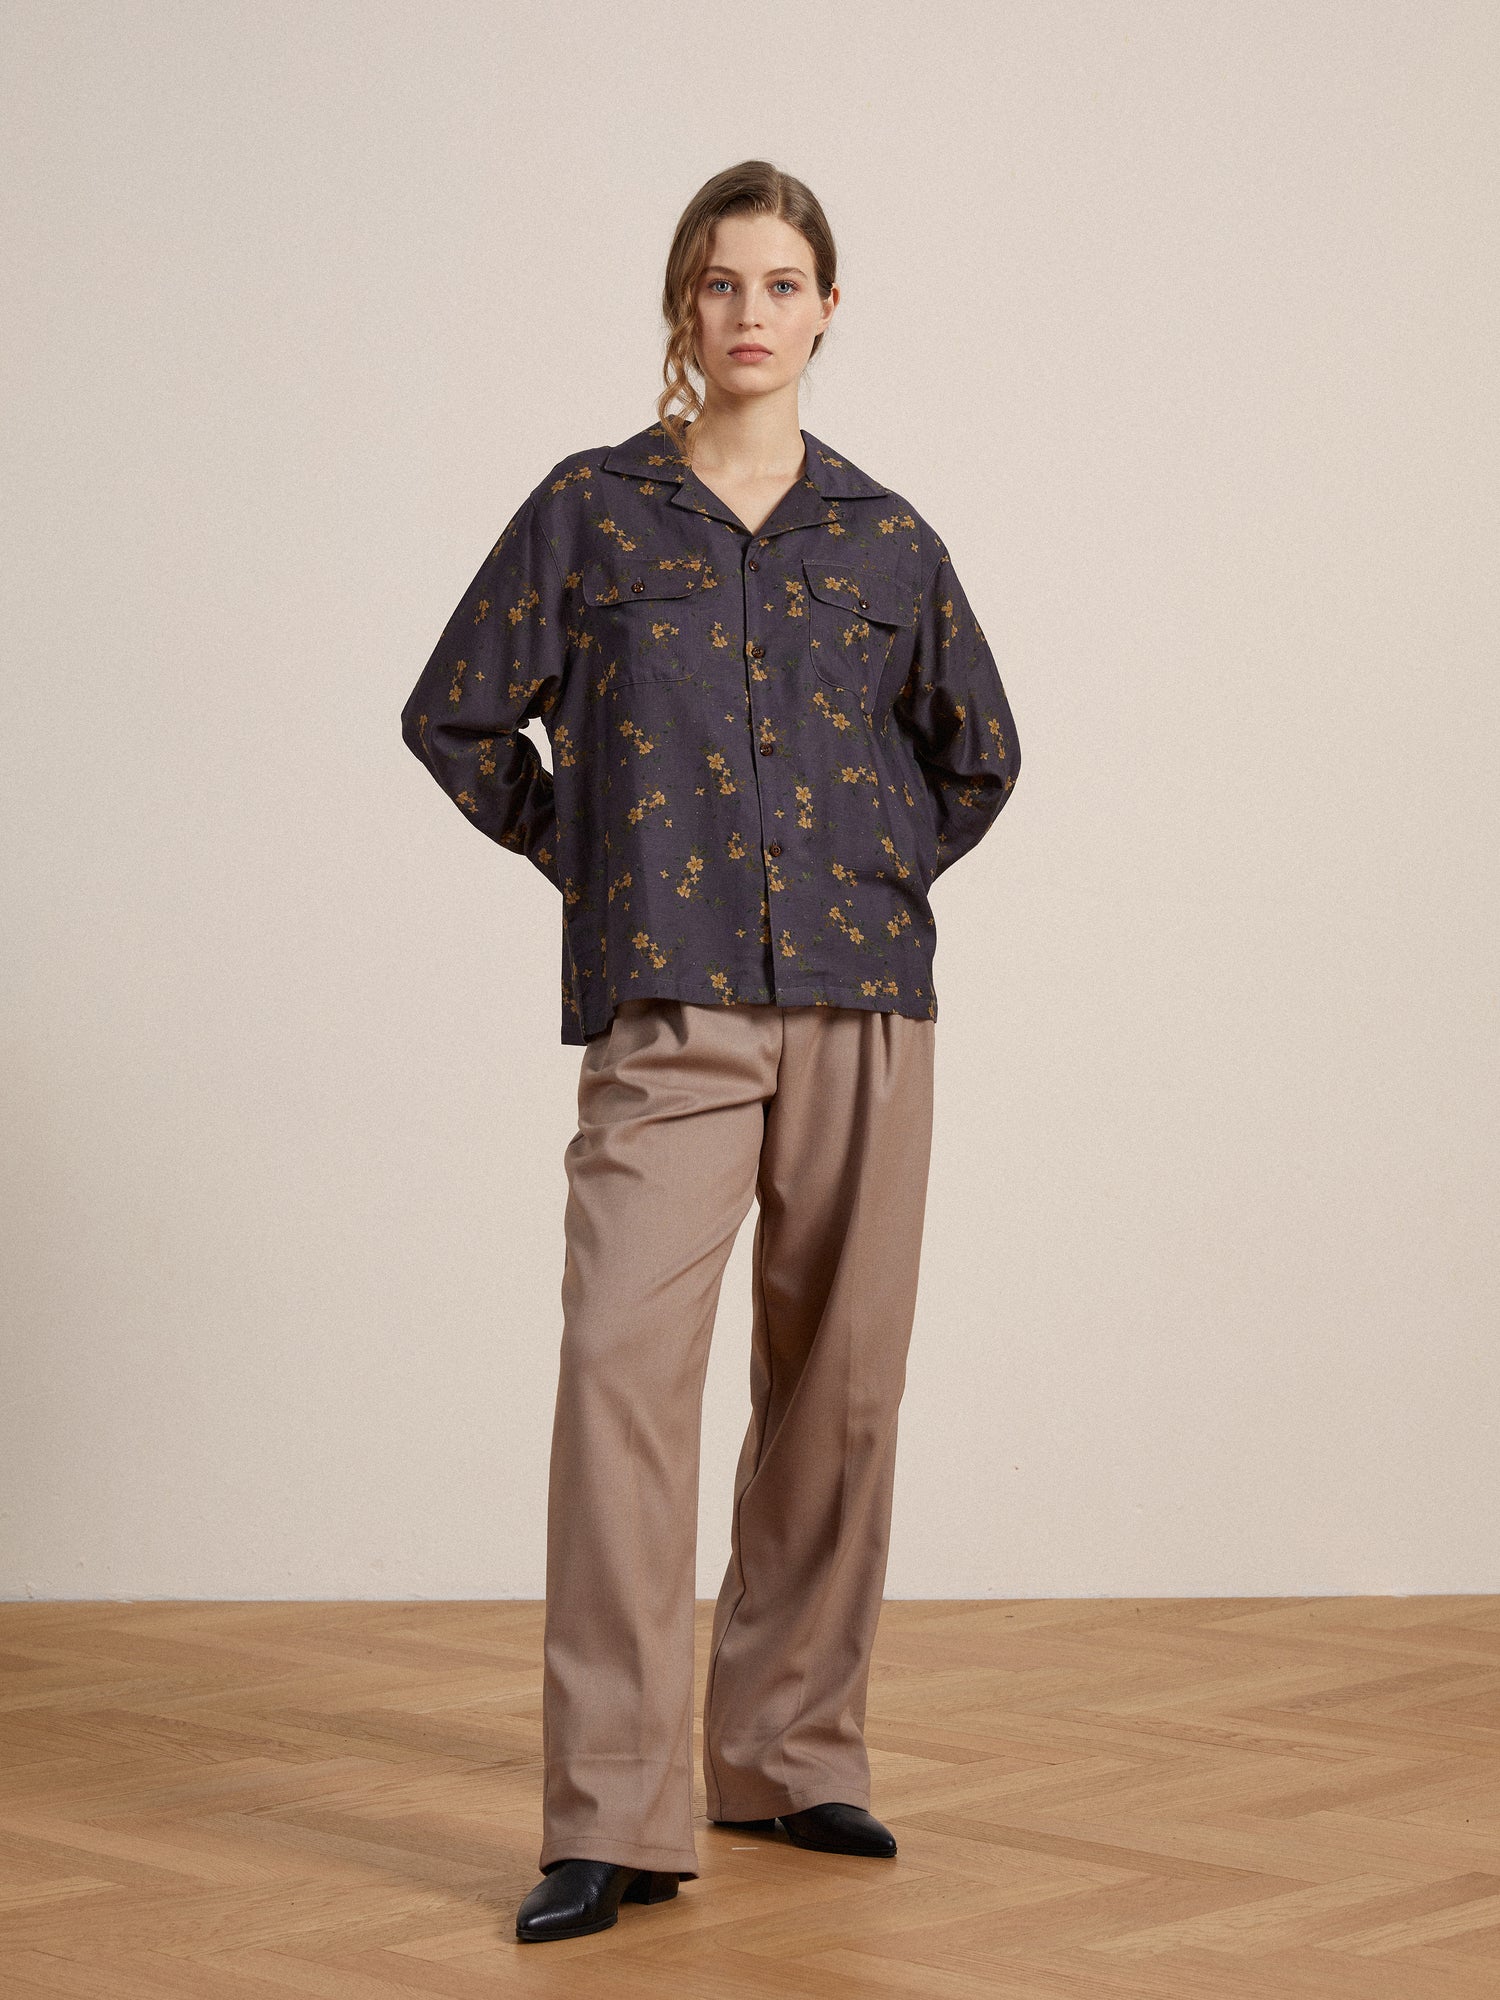 The model is wearing a Found Dusty LS Camp Shirt and tan trousers.